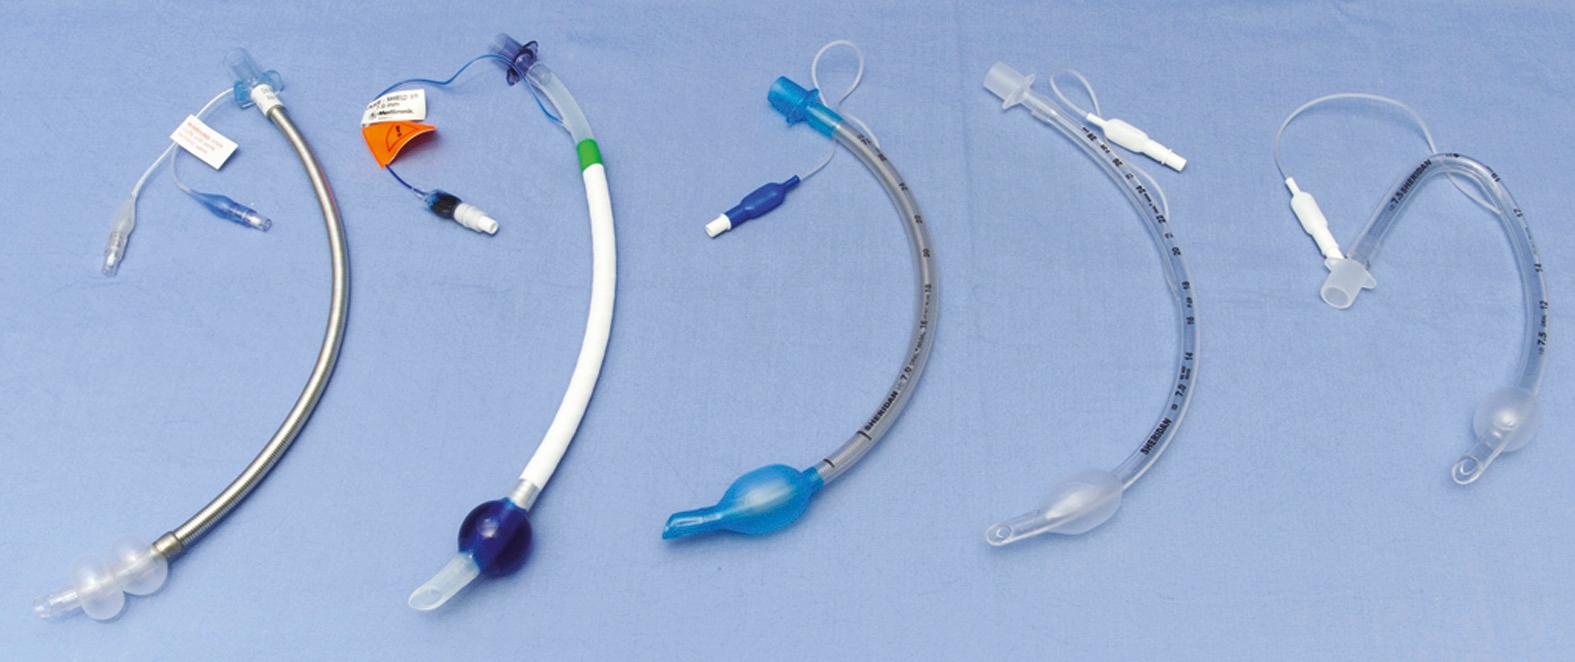 Fig. 97.8, Left to right, Mallinckrodt laser-safe tube (note the two distal balloons, one for air, one for saline); Laser-Guard laser-safe tube (note the methylene blue in the distal balloon); wire spiral tube (compression resistant); standard tube; and down right-angled endotracheal tube. The latter three tubes are polyvinylchloride-based endotracheal tubes.